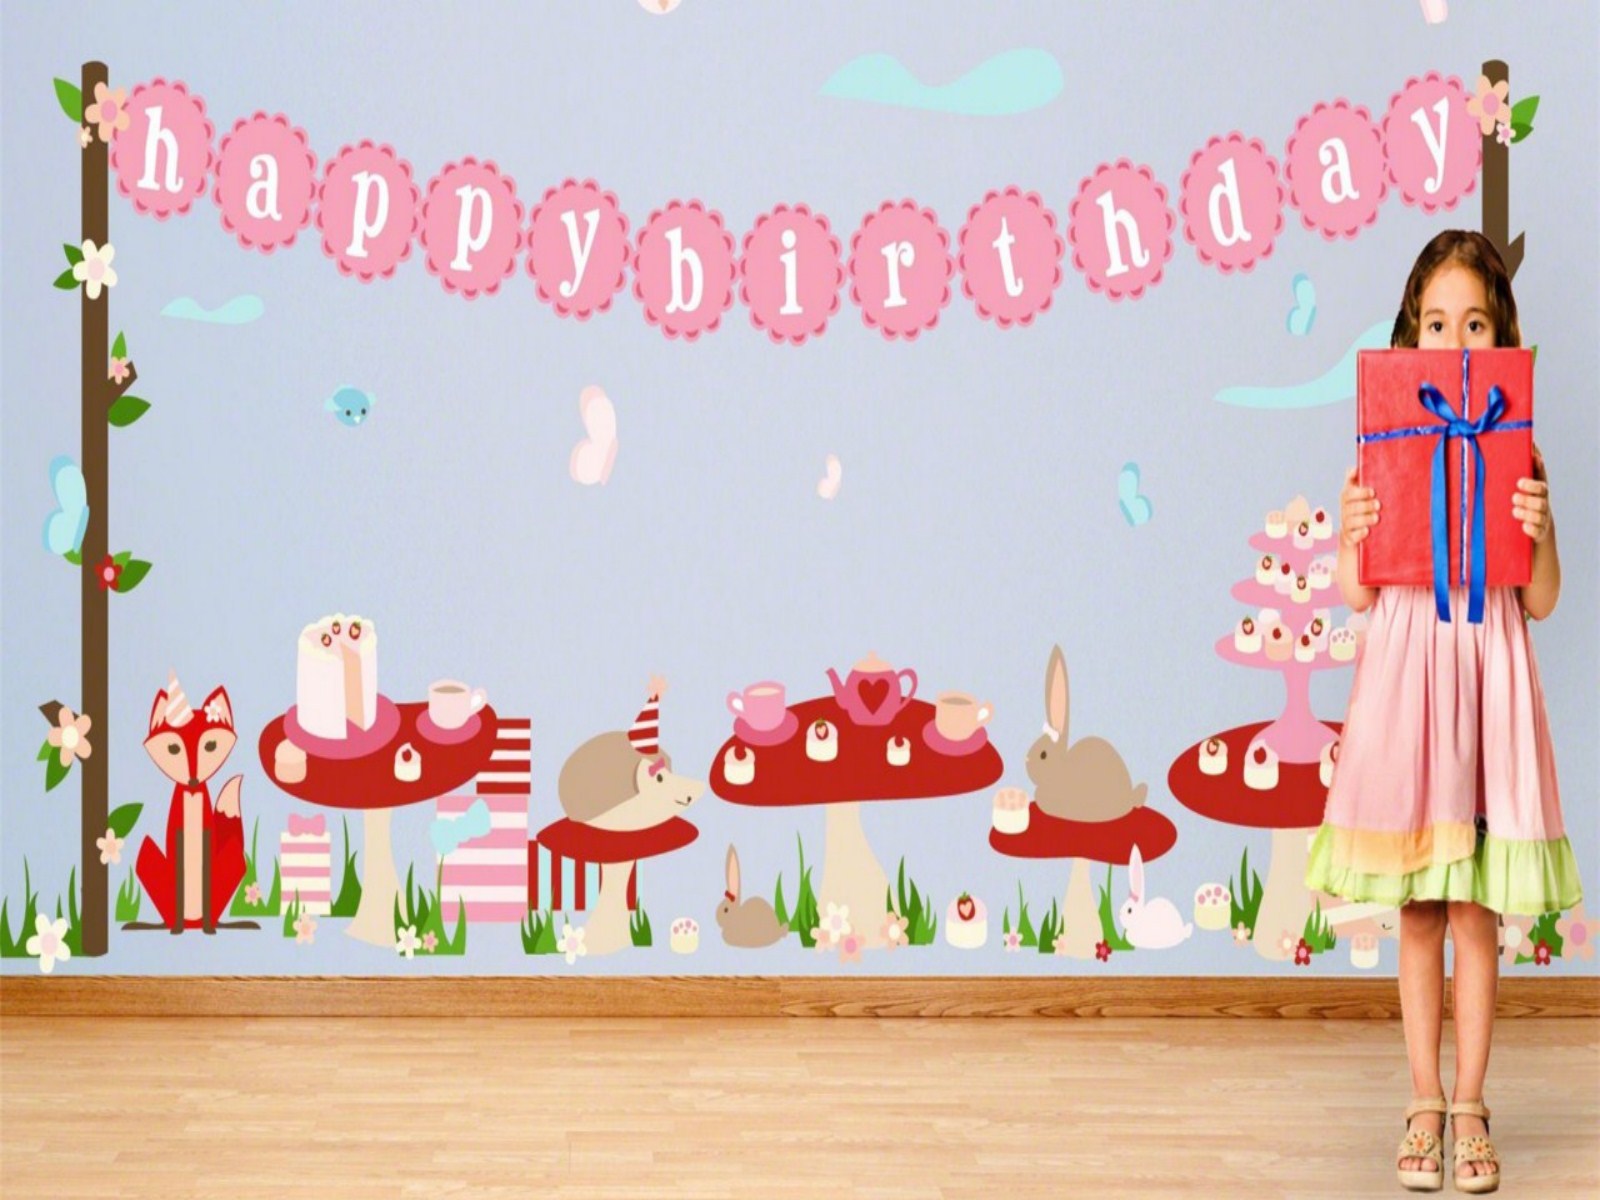 BirtHDay Party Background Wallpaper